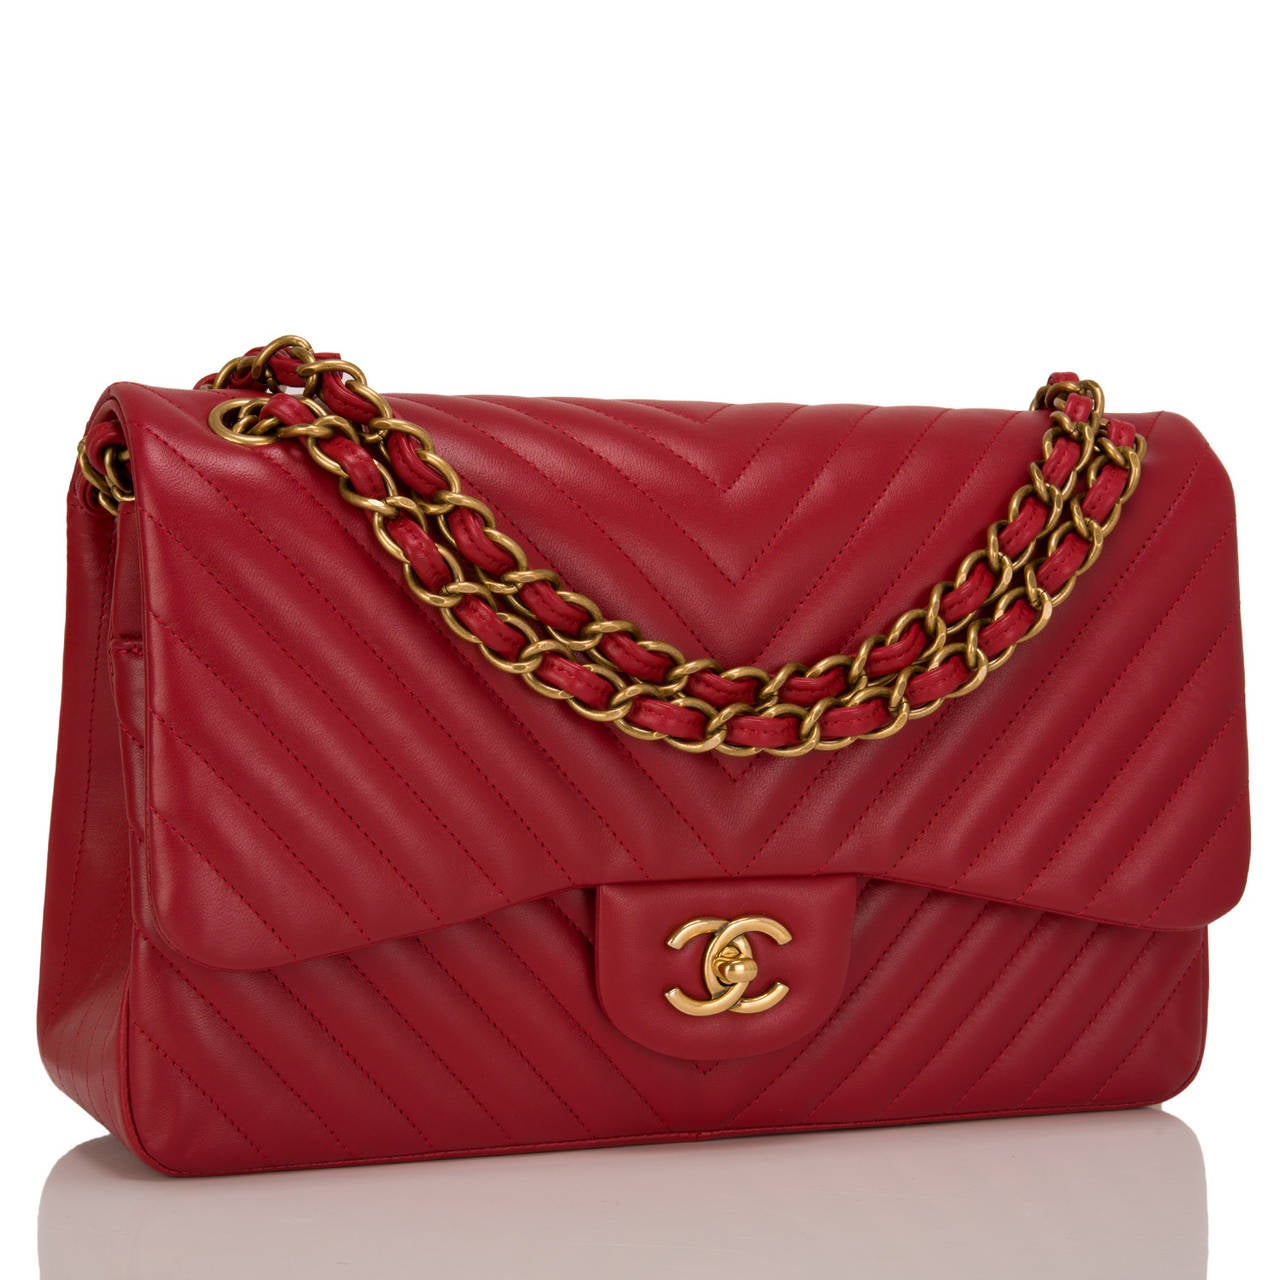 This limited edition Chanel Dark Red Chevron Jumble double flap bag in quilted lambskin leather and aged gold tone hardware is an edgy take on the iconic Chanel Classic bag. It features a front flap with signature CC turnlock closure, half moon back